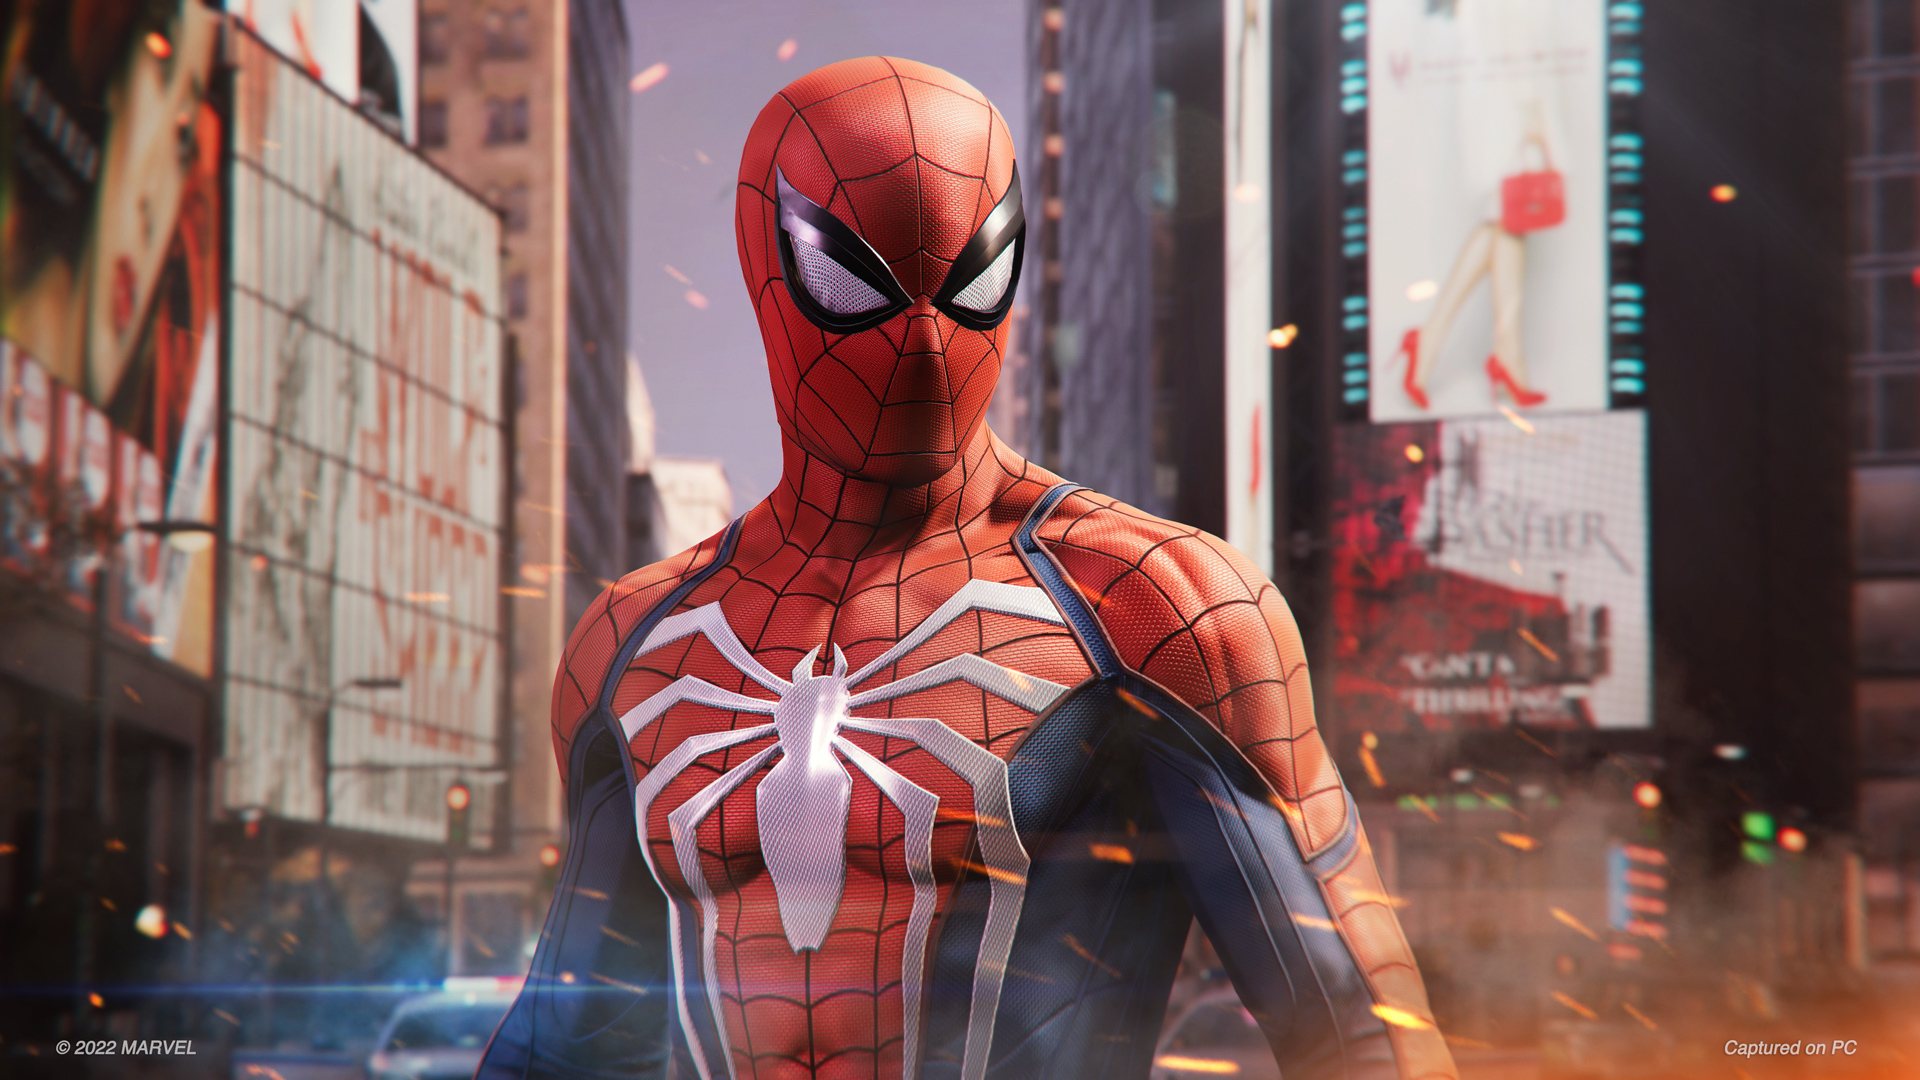 Marvel’s Spider-Man Remastered on PC makes me excited for Sony games again